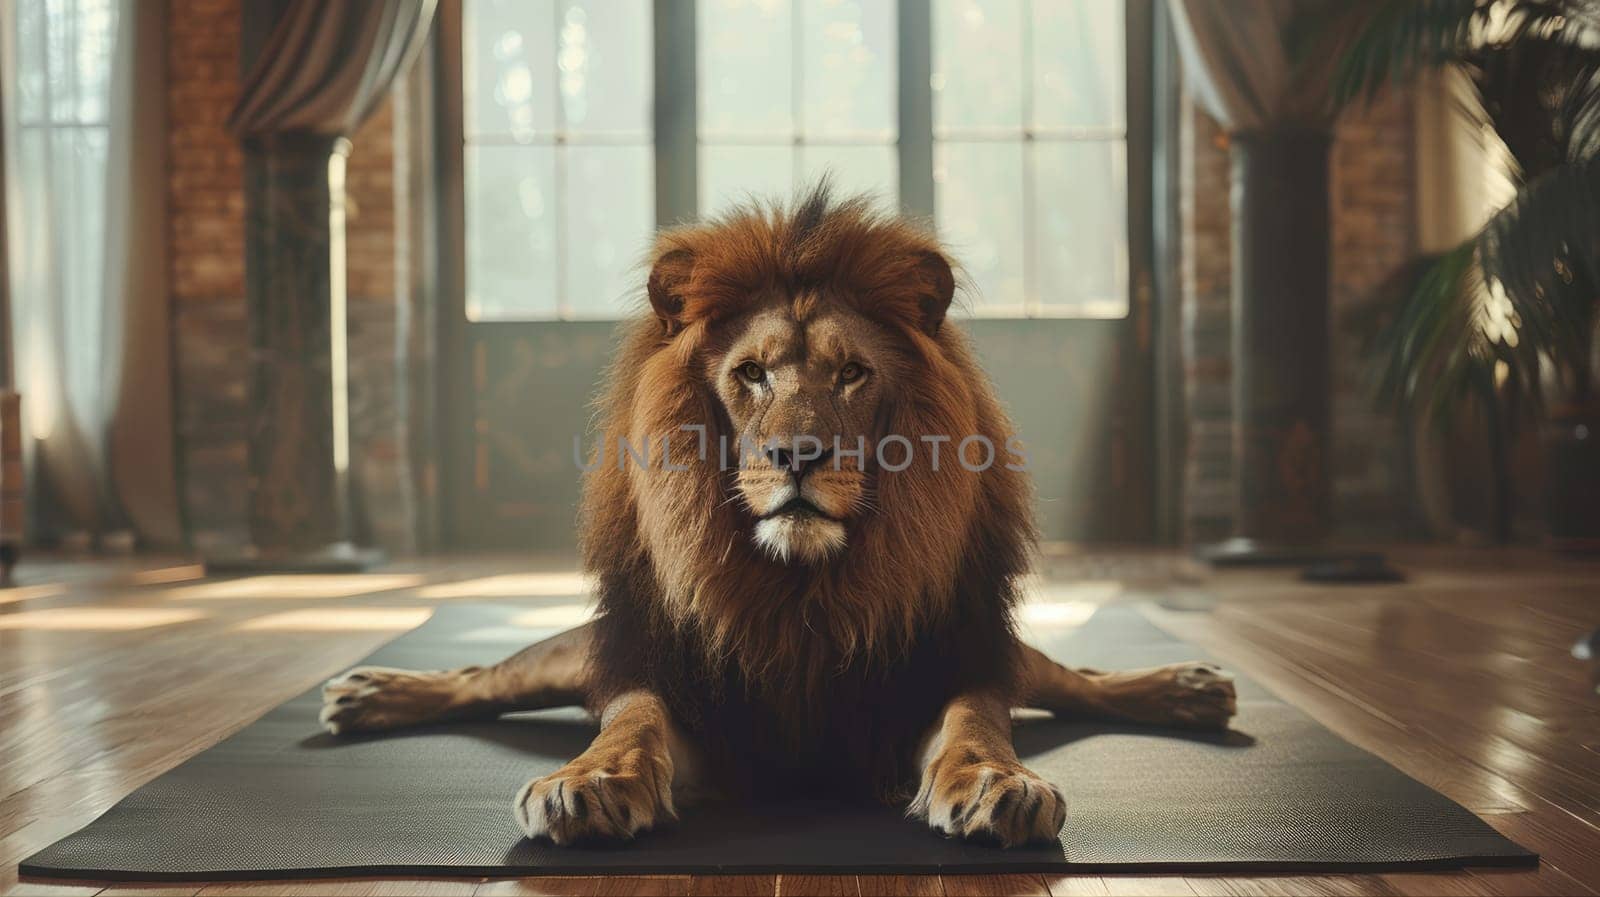 Lion resting on yoga mat in room by natali_brill